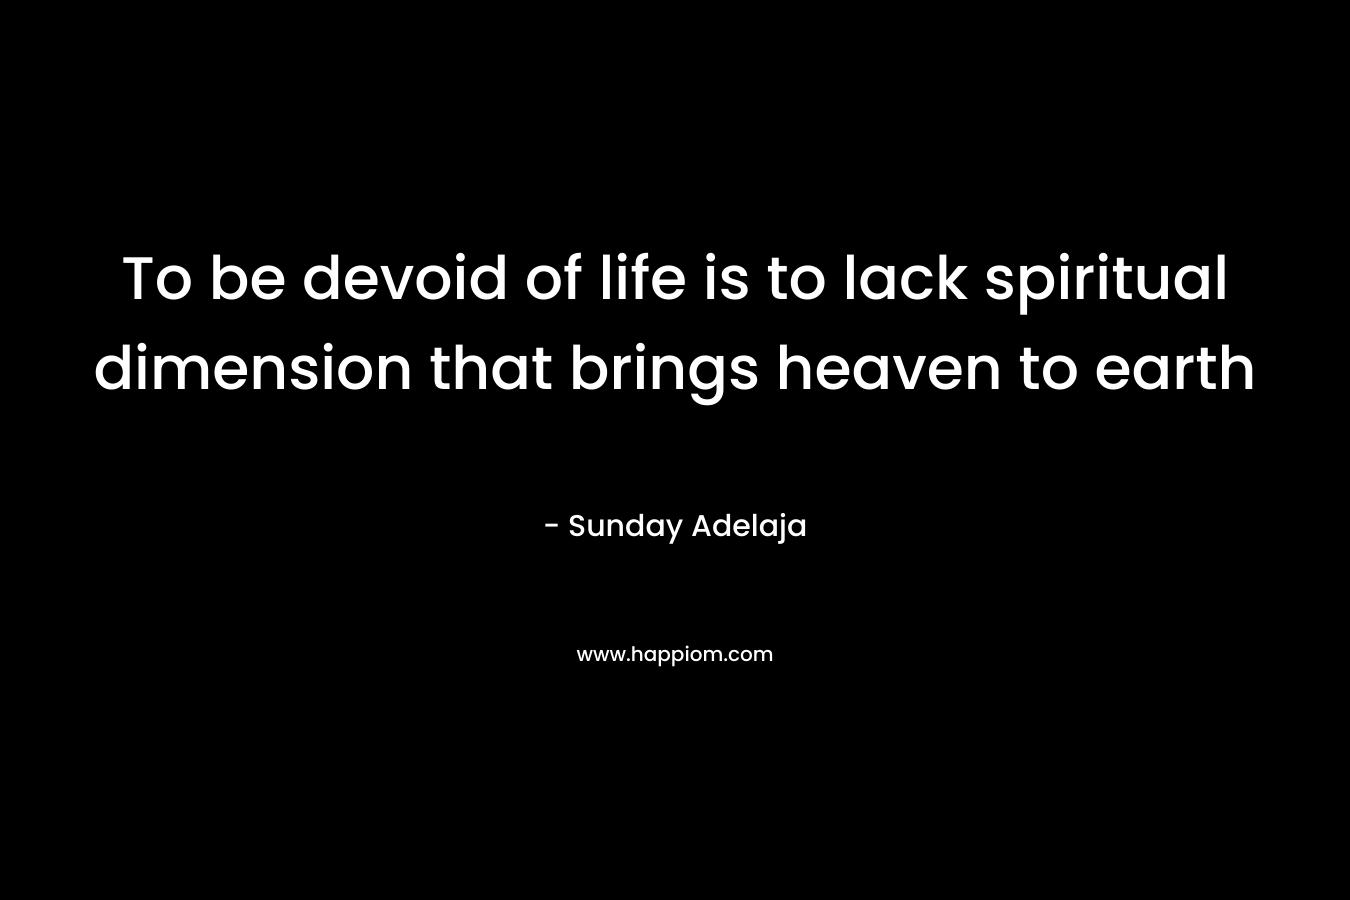 To be devoid of life is to lack spiritual dimension that brings heaven to earth